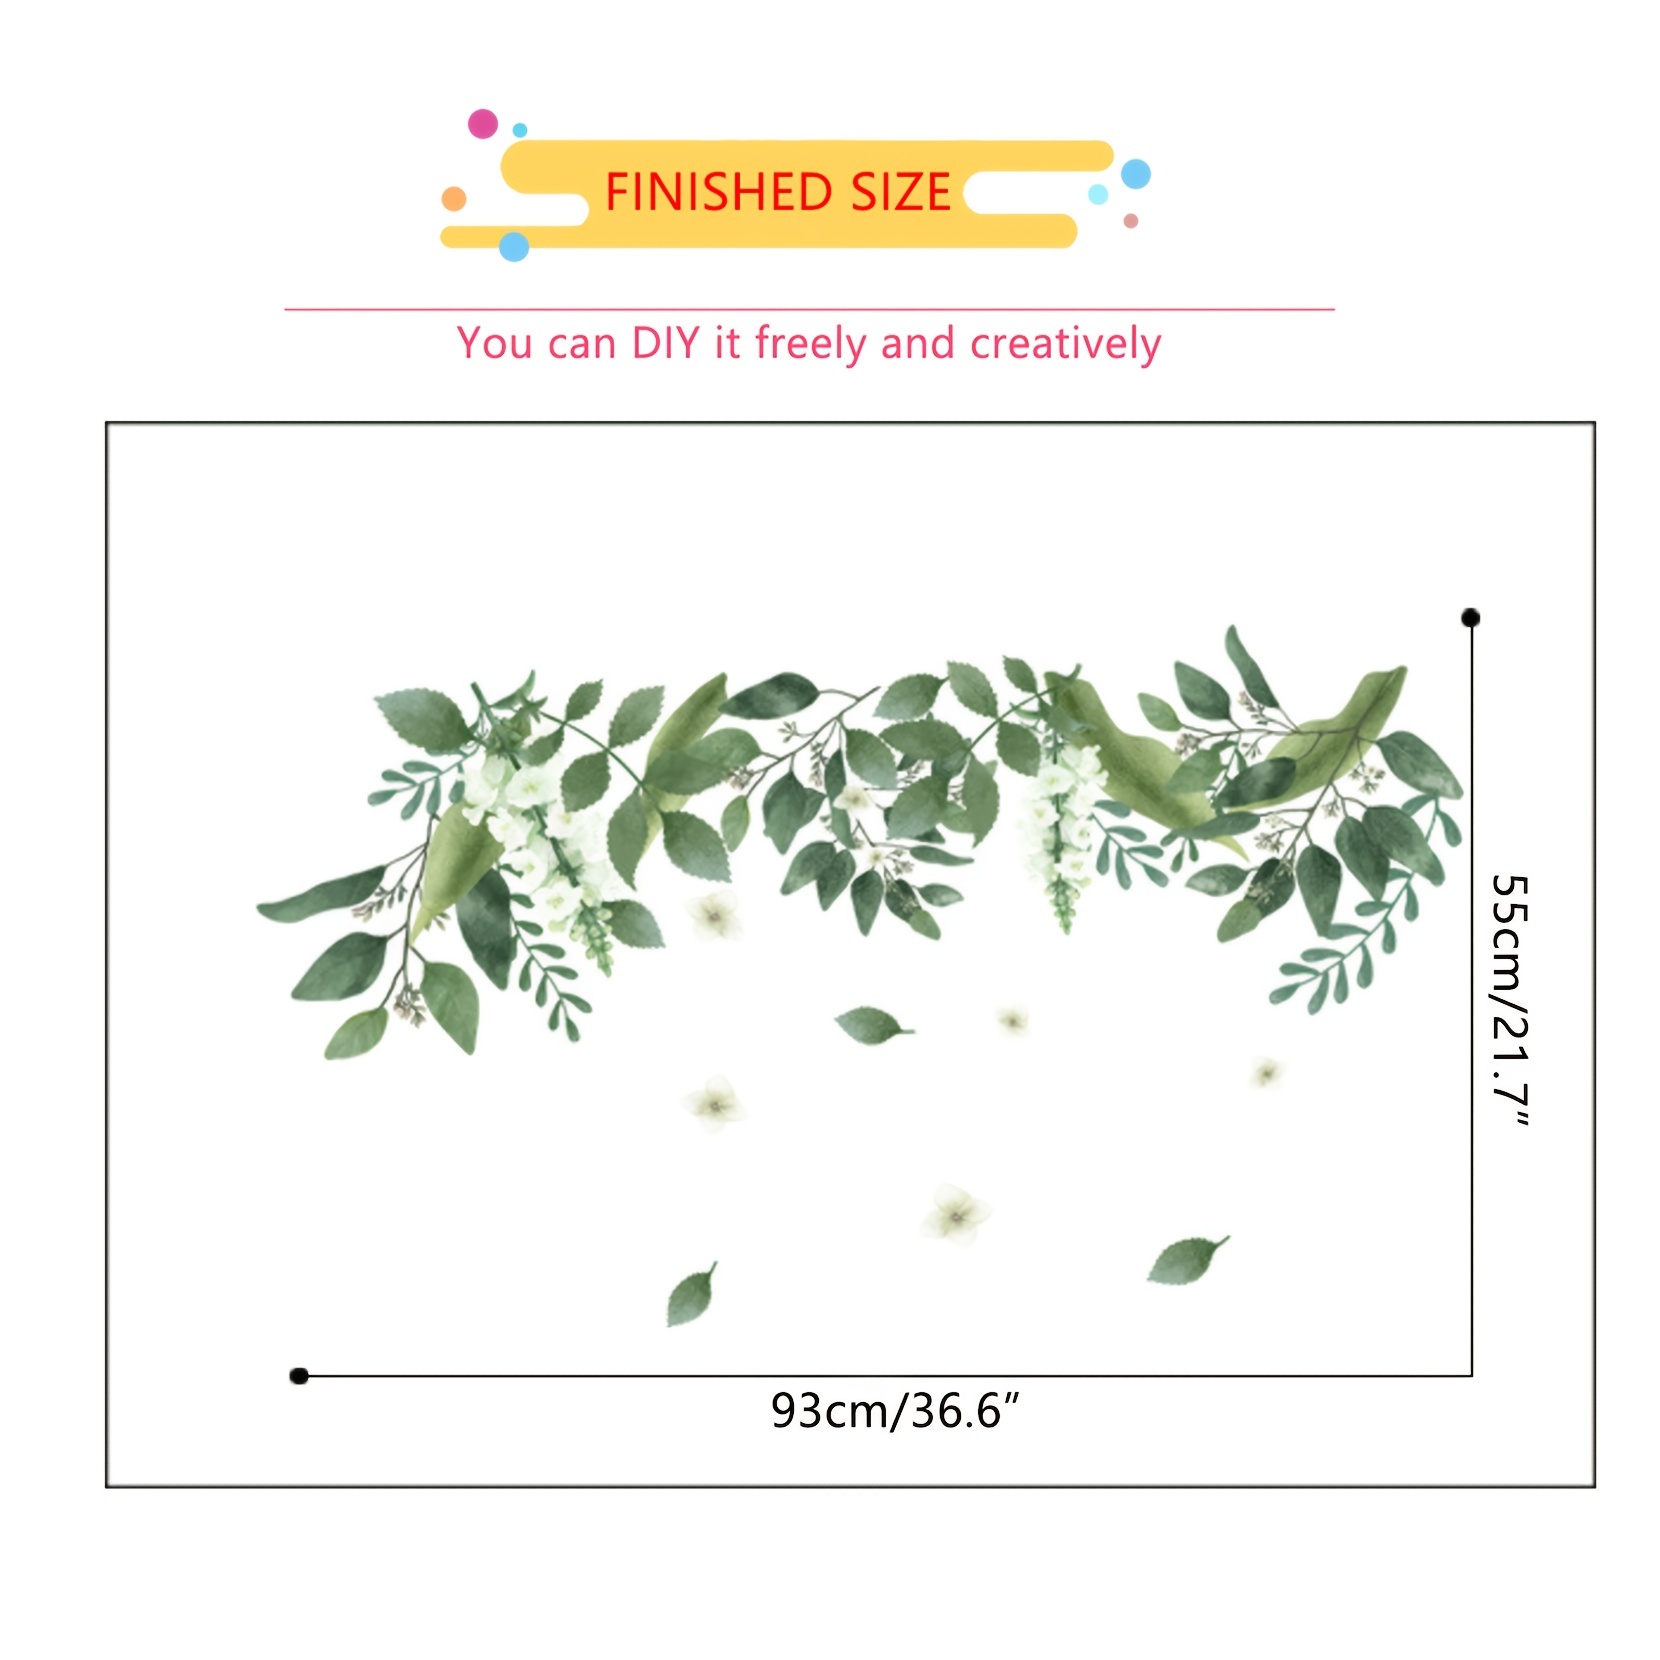 Green Hanging Leaf Wall Decals, Removable Fresh Plant Leaves